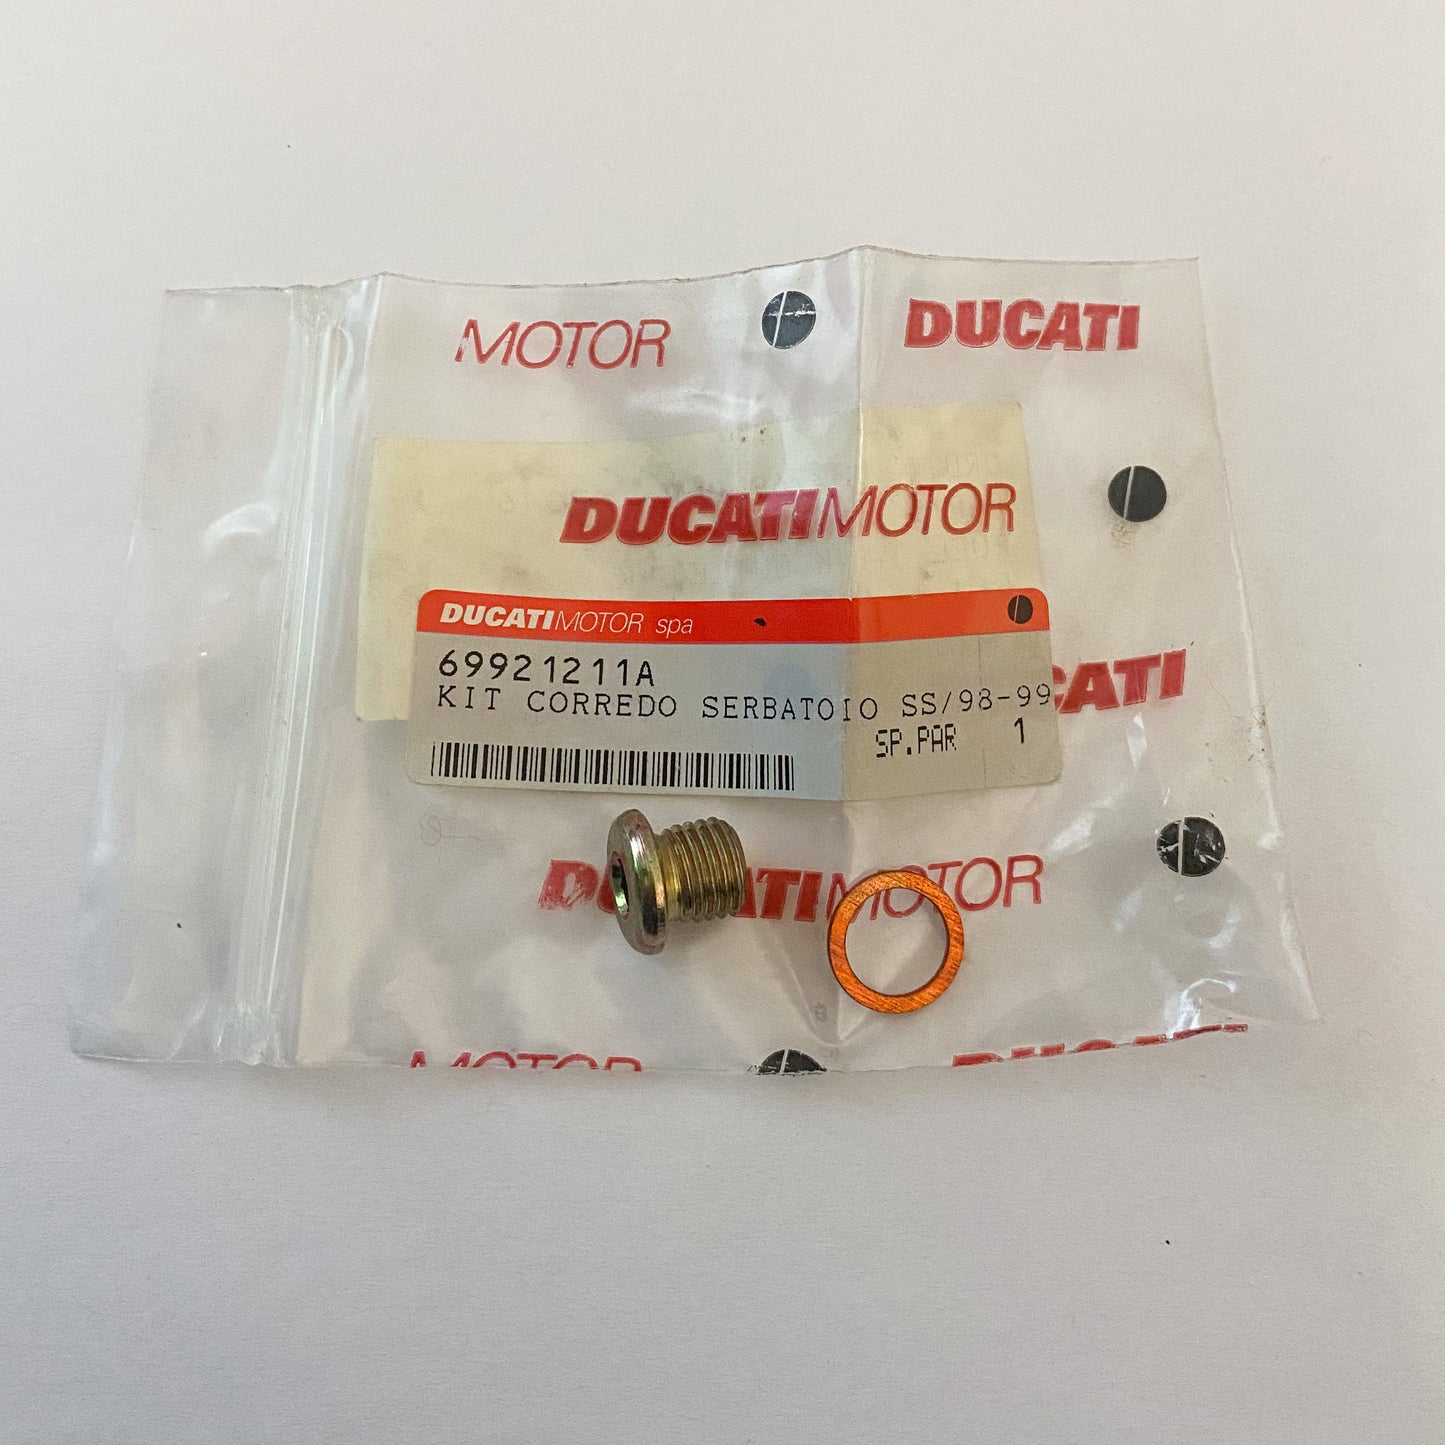 DUCATI FUEL TANK OUTFIT KIT SS/98-99 69921211A